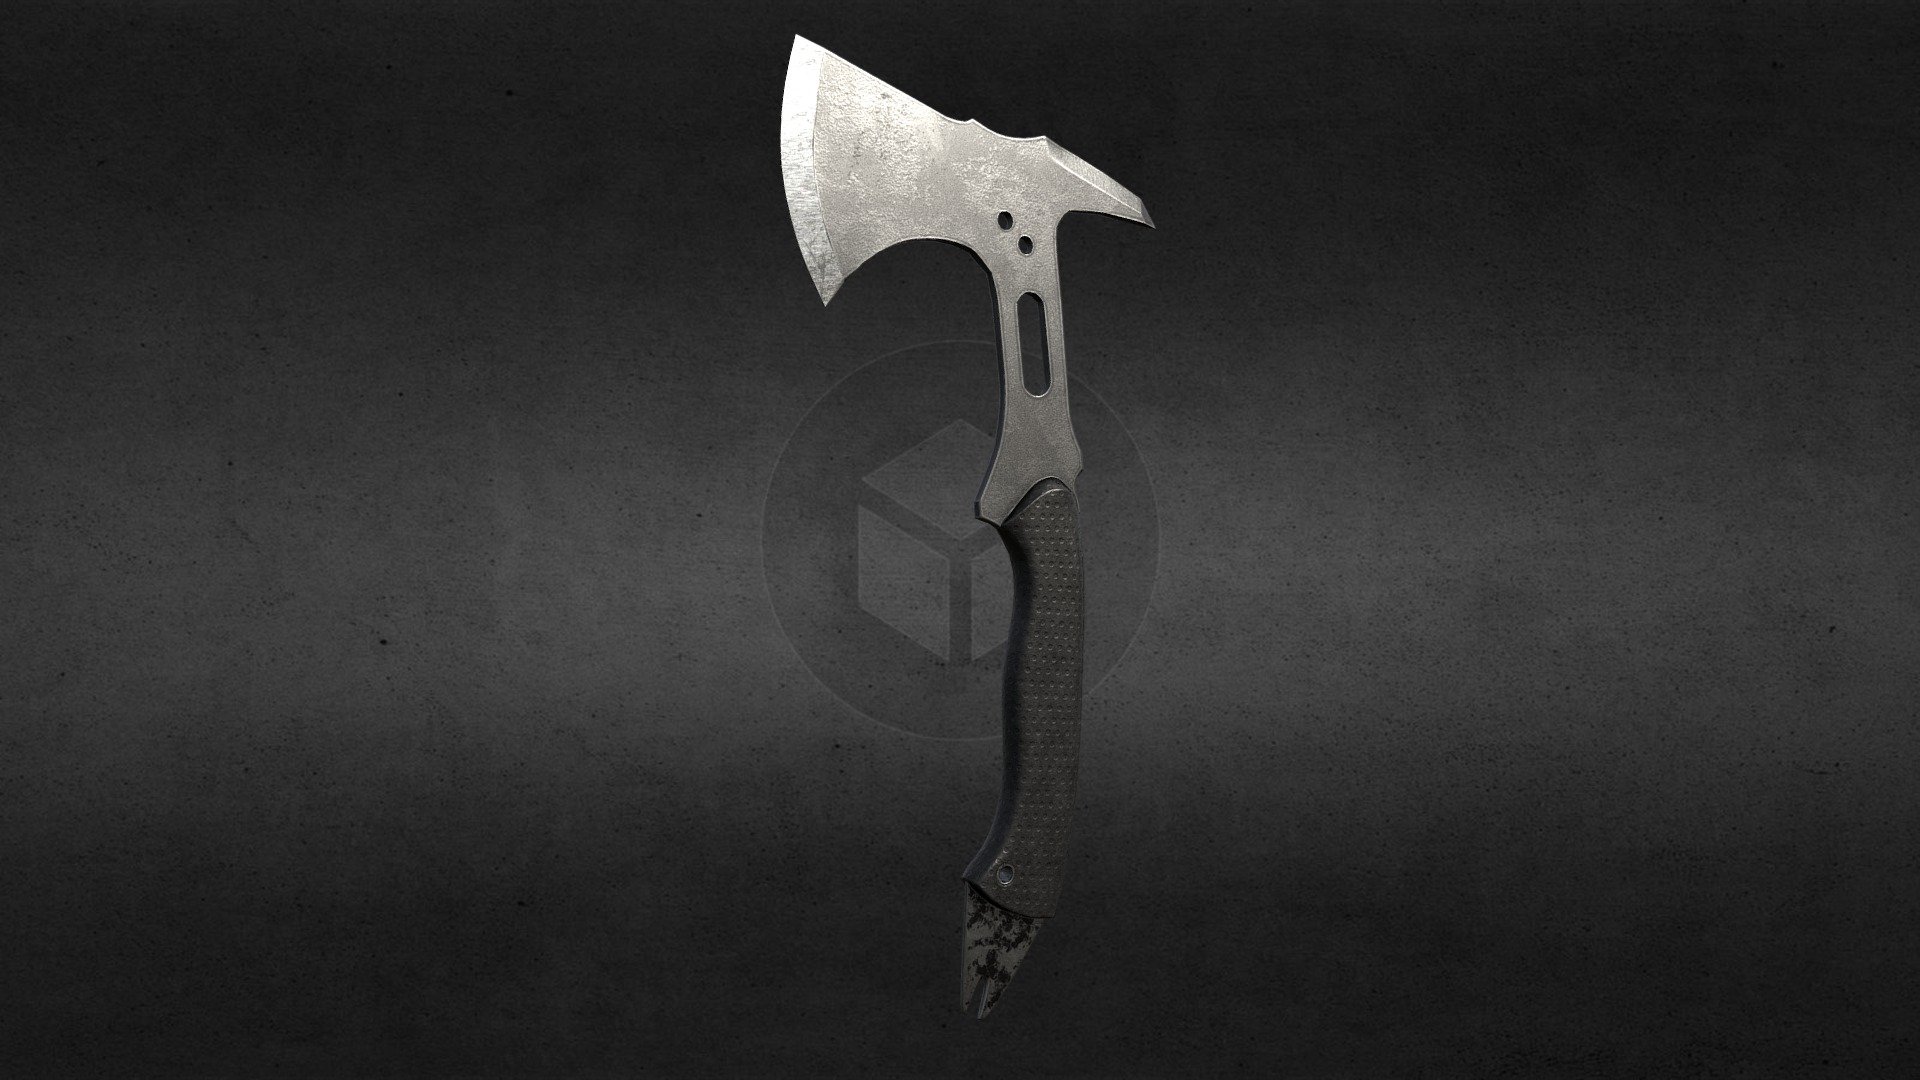 Tactical Axe
Blender and Substance pinater - Tactical Axe - Download Free 3D model by TORI106 3d model